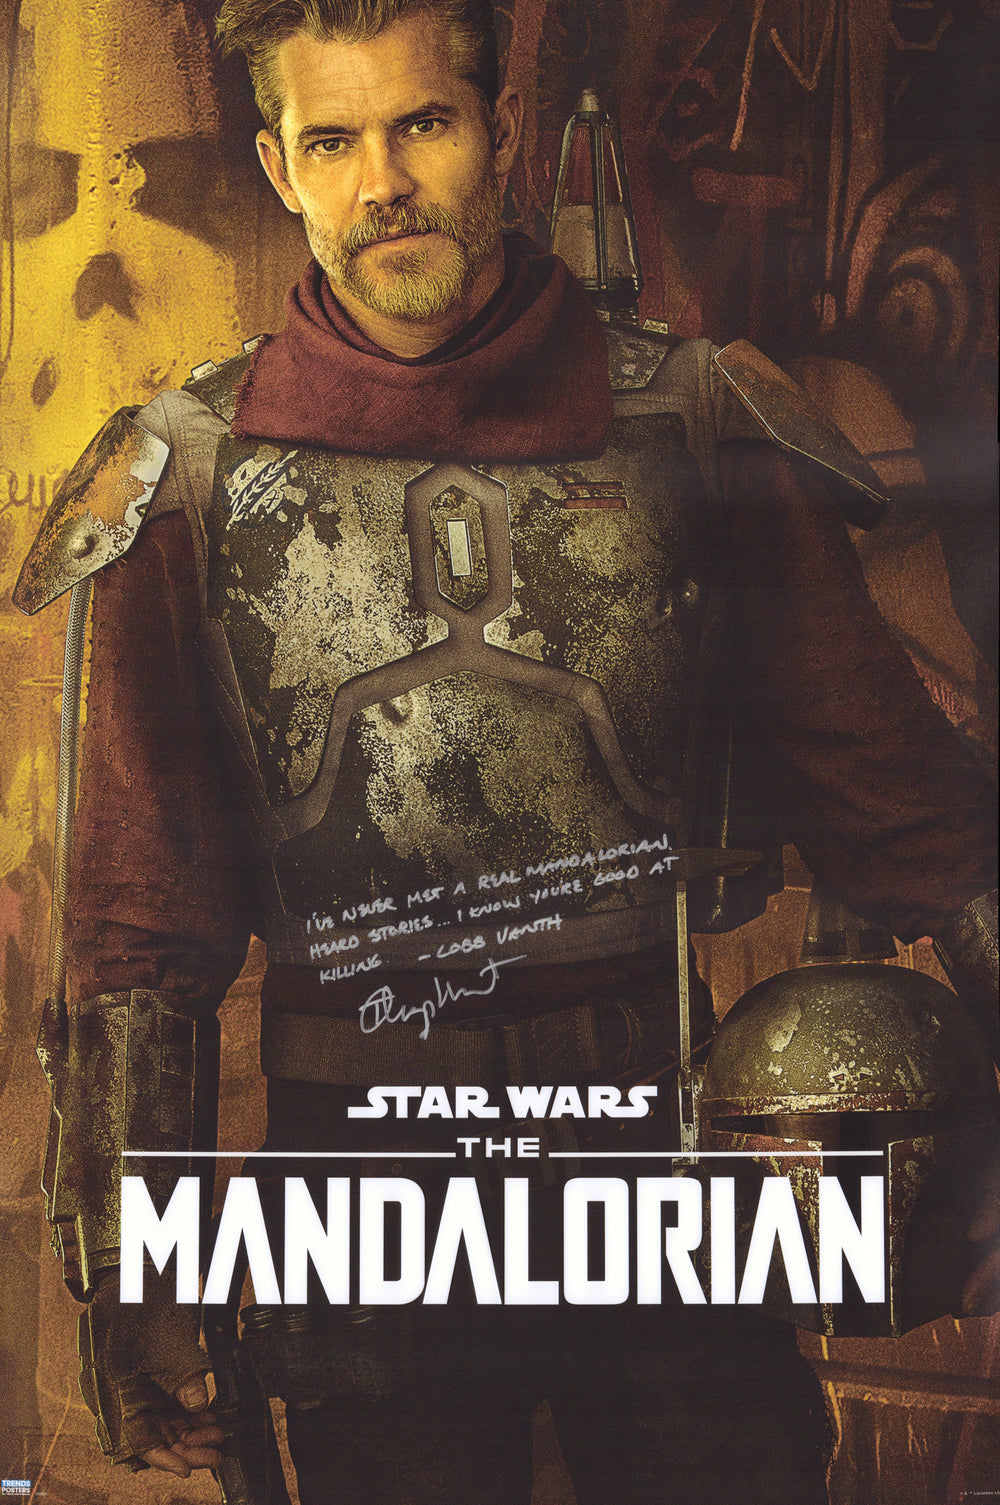 Timothy Olyphant as Cobb Vanth in Star Wars: The Mandalorian (SWAU) Signed Poster with Character Name & Long Quote